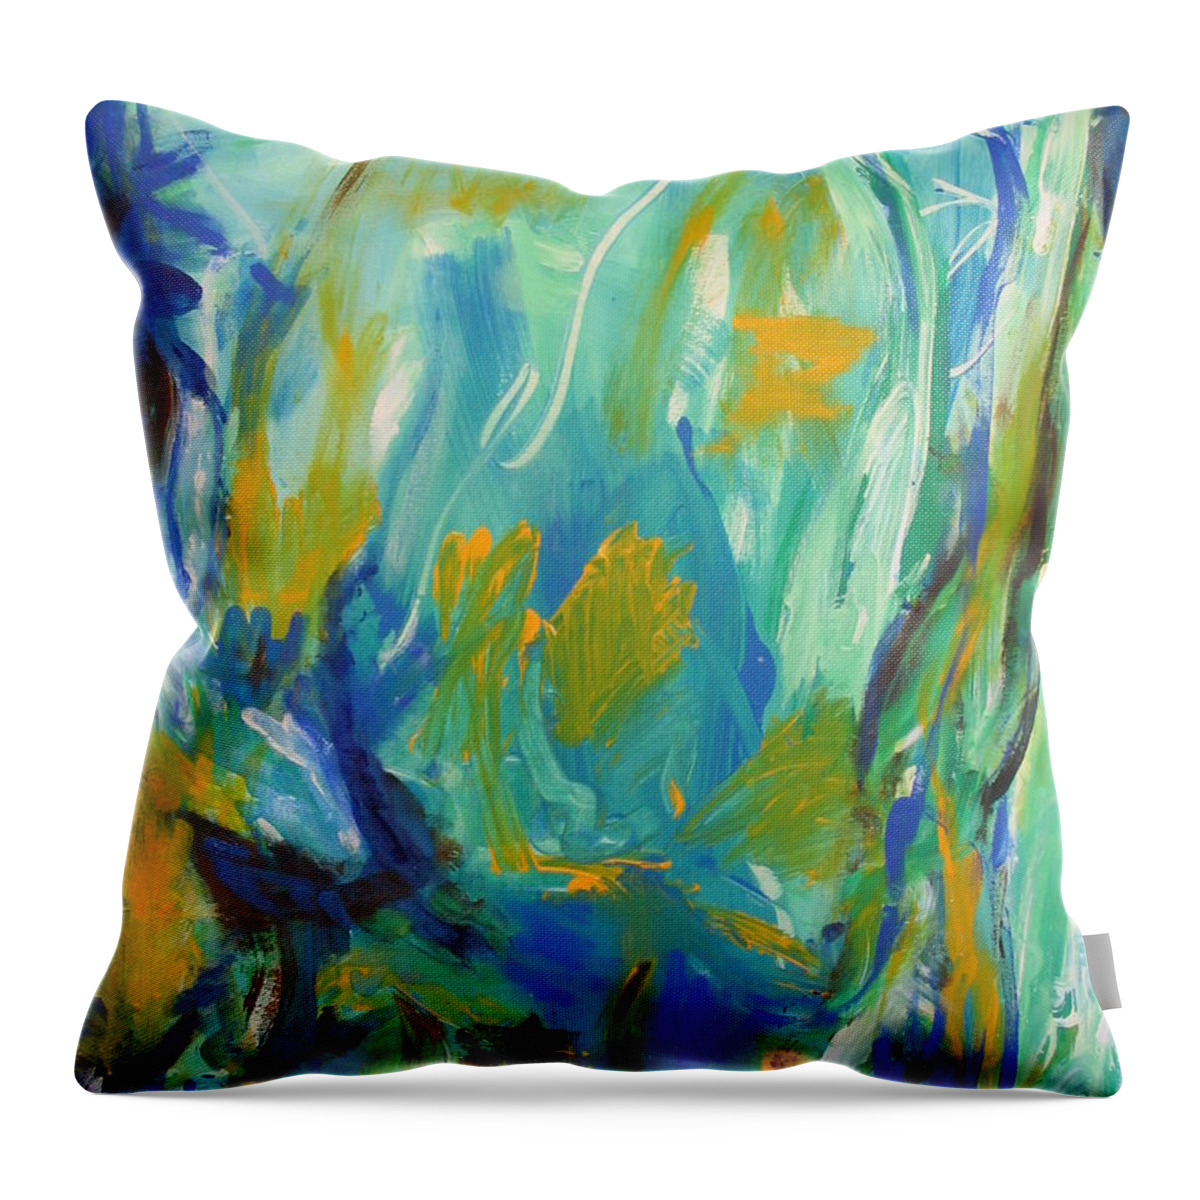  Spring Time Throw Pillow featuring the painting Spring Time by Fereshteh Stoecklein